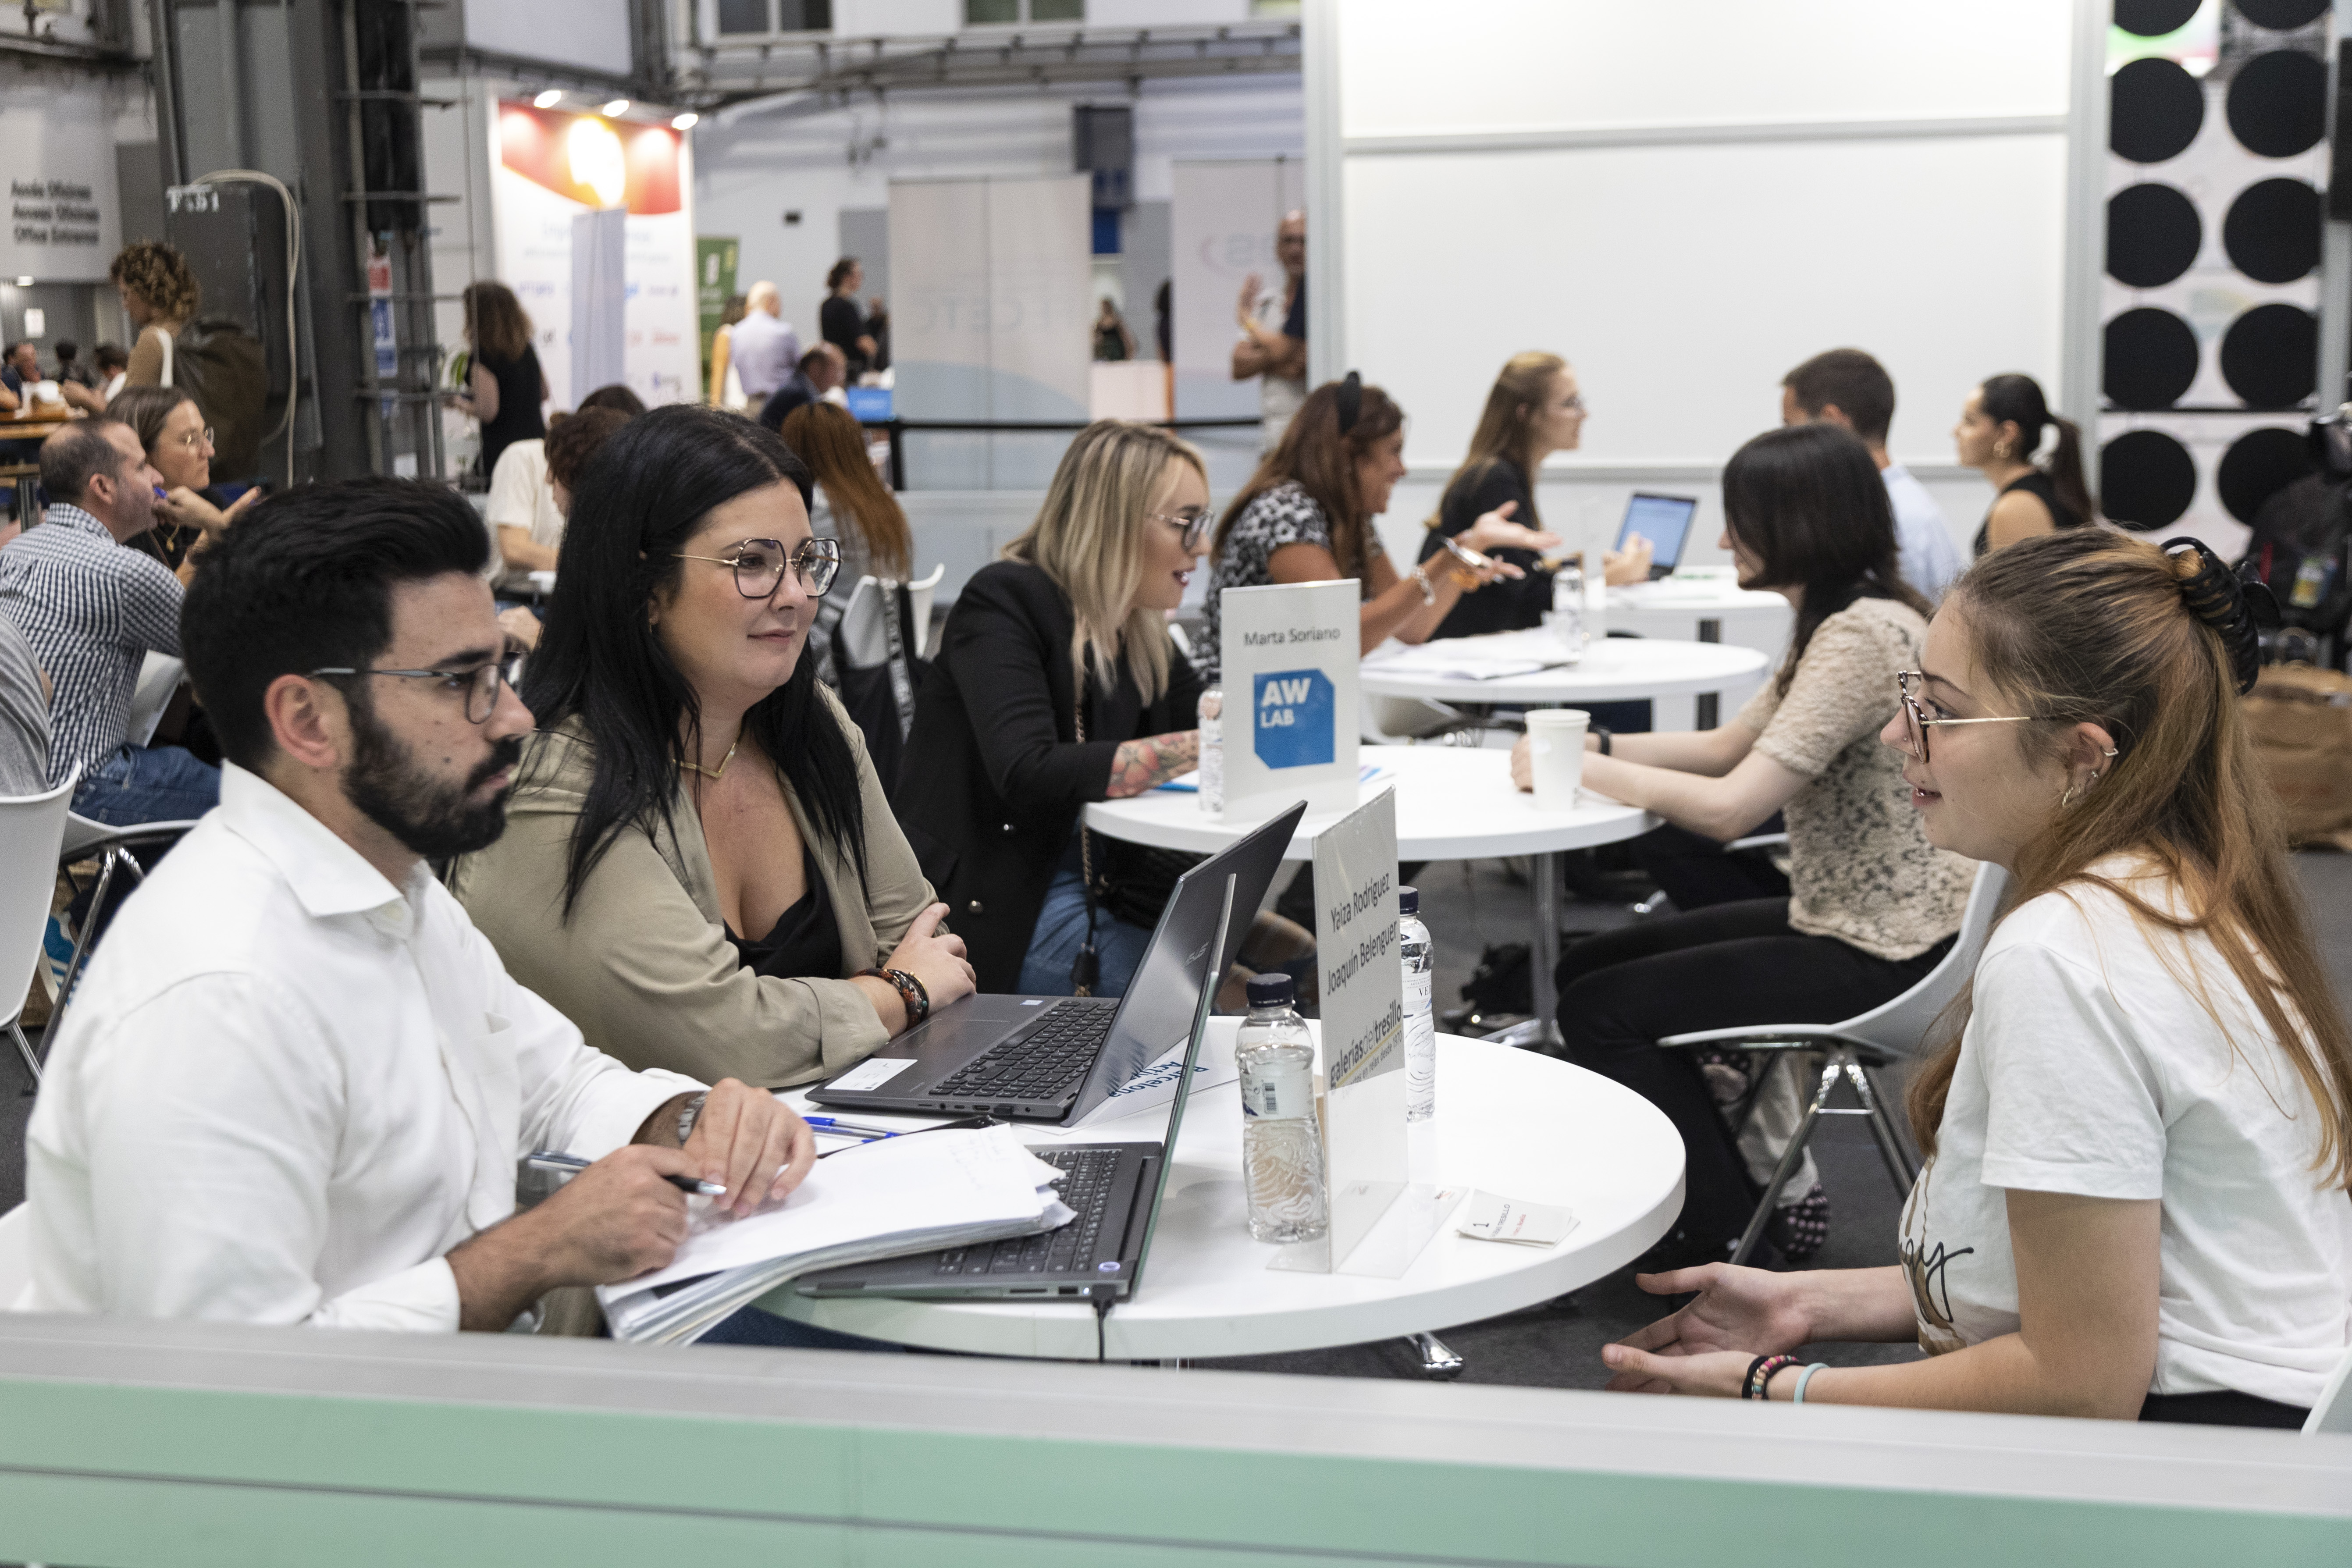 Barcelona Activa organises activities and networking sessions for people looking for work in strategic sectors